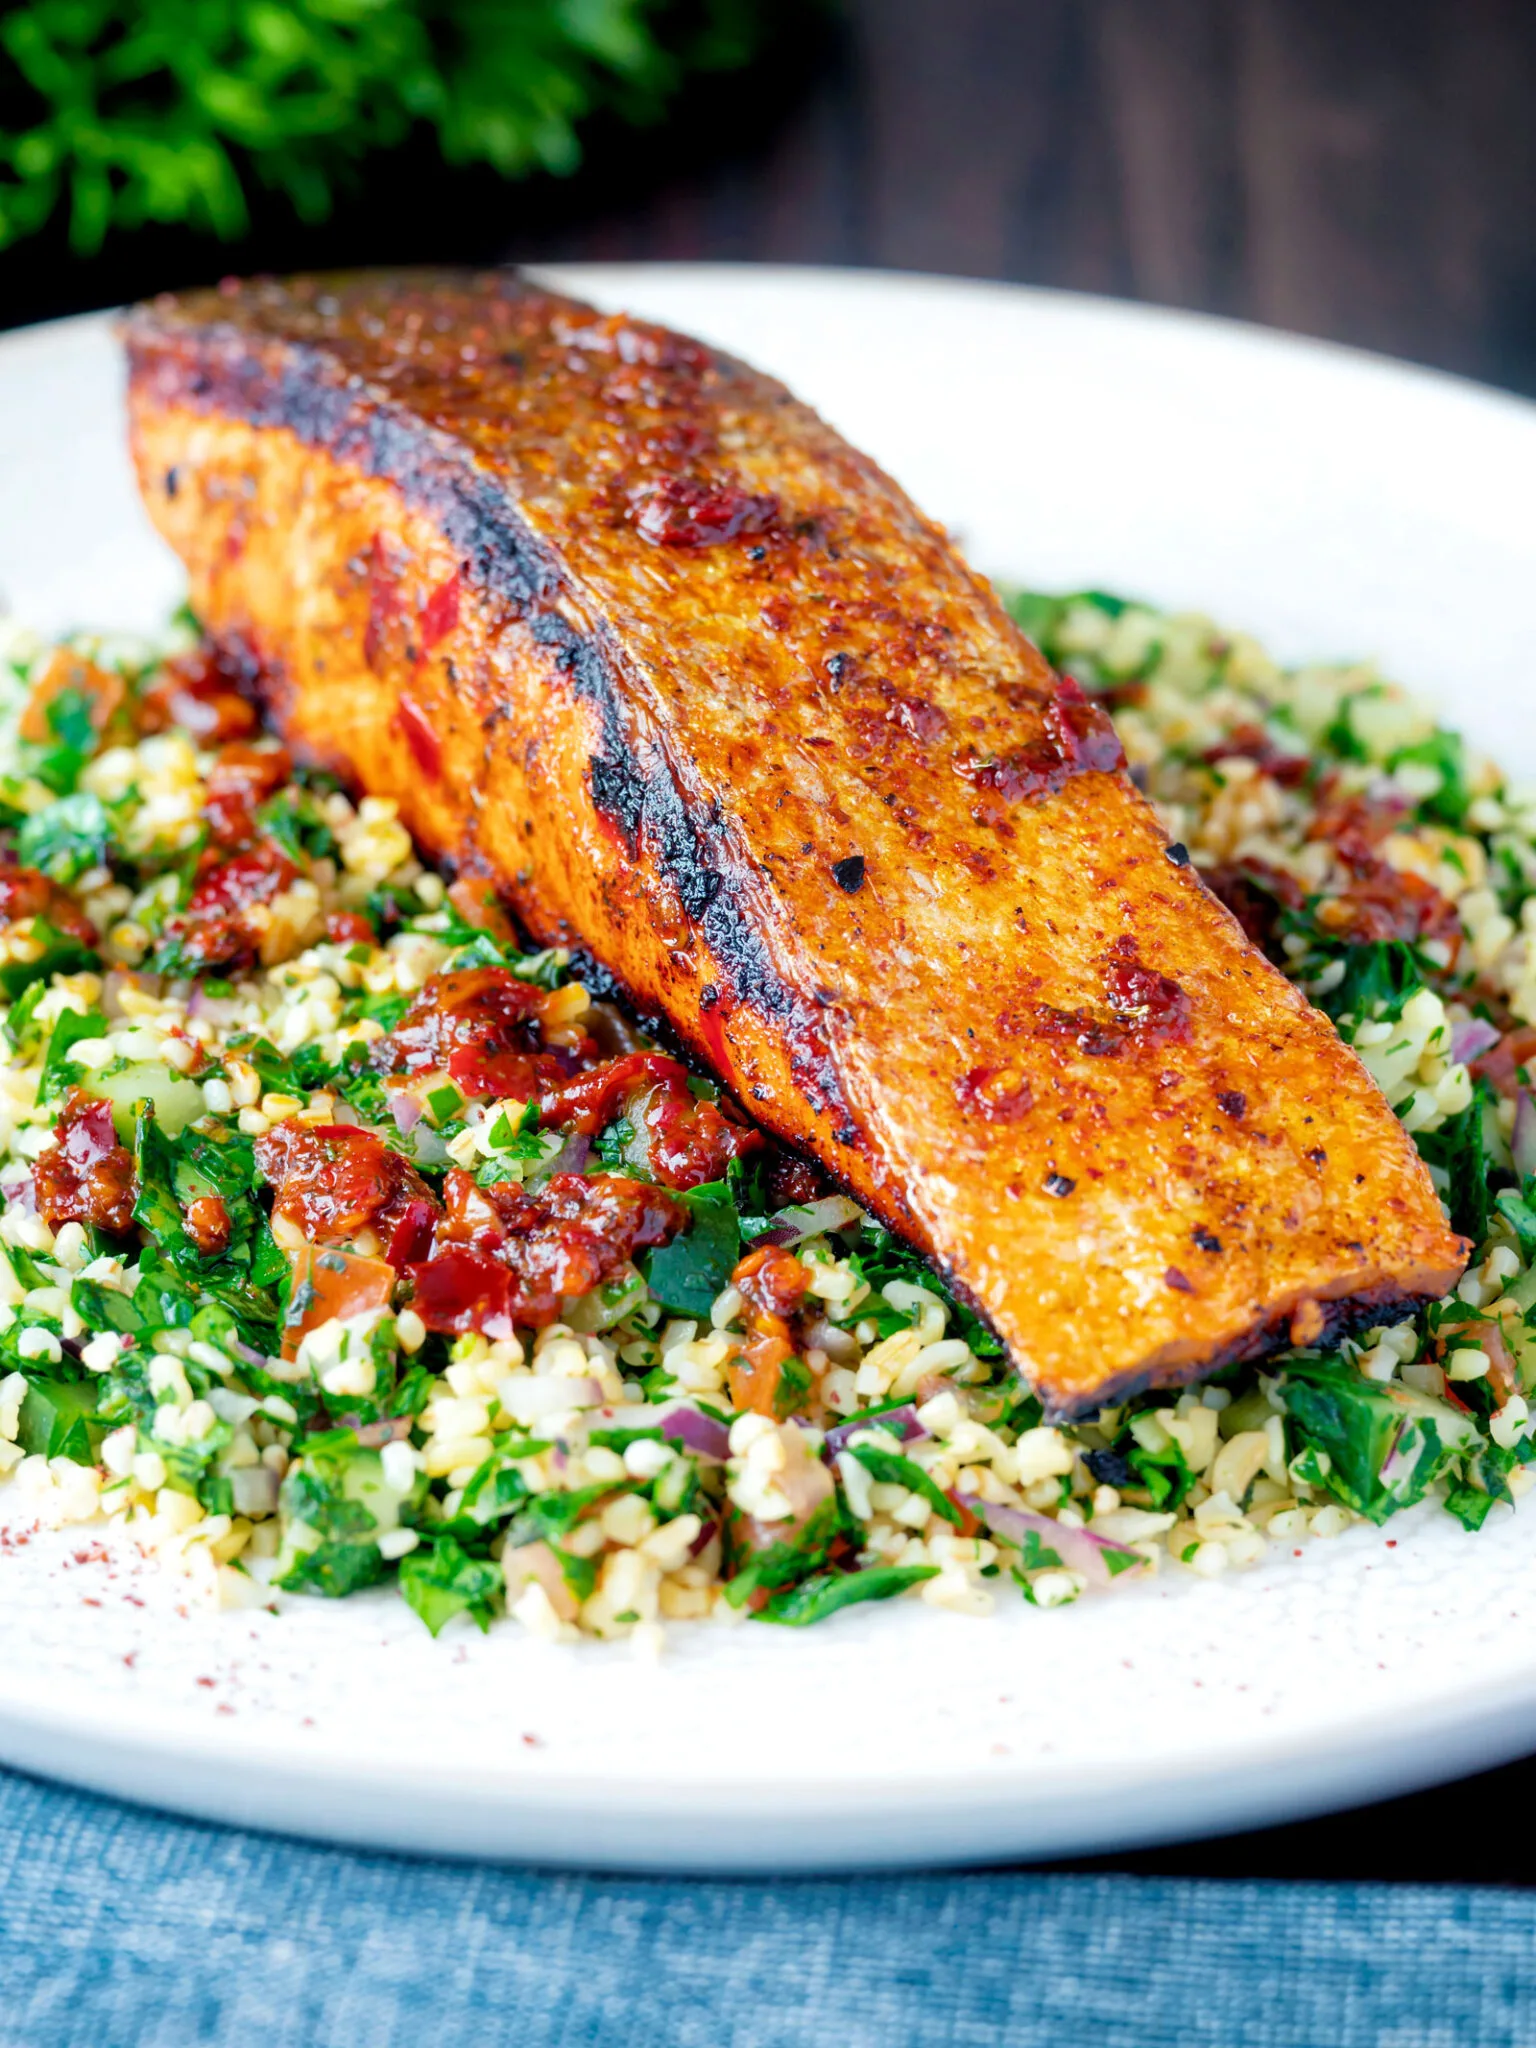 Pan fried harissa salmon fillet served with tabbouleh salad.